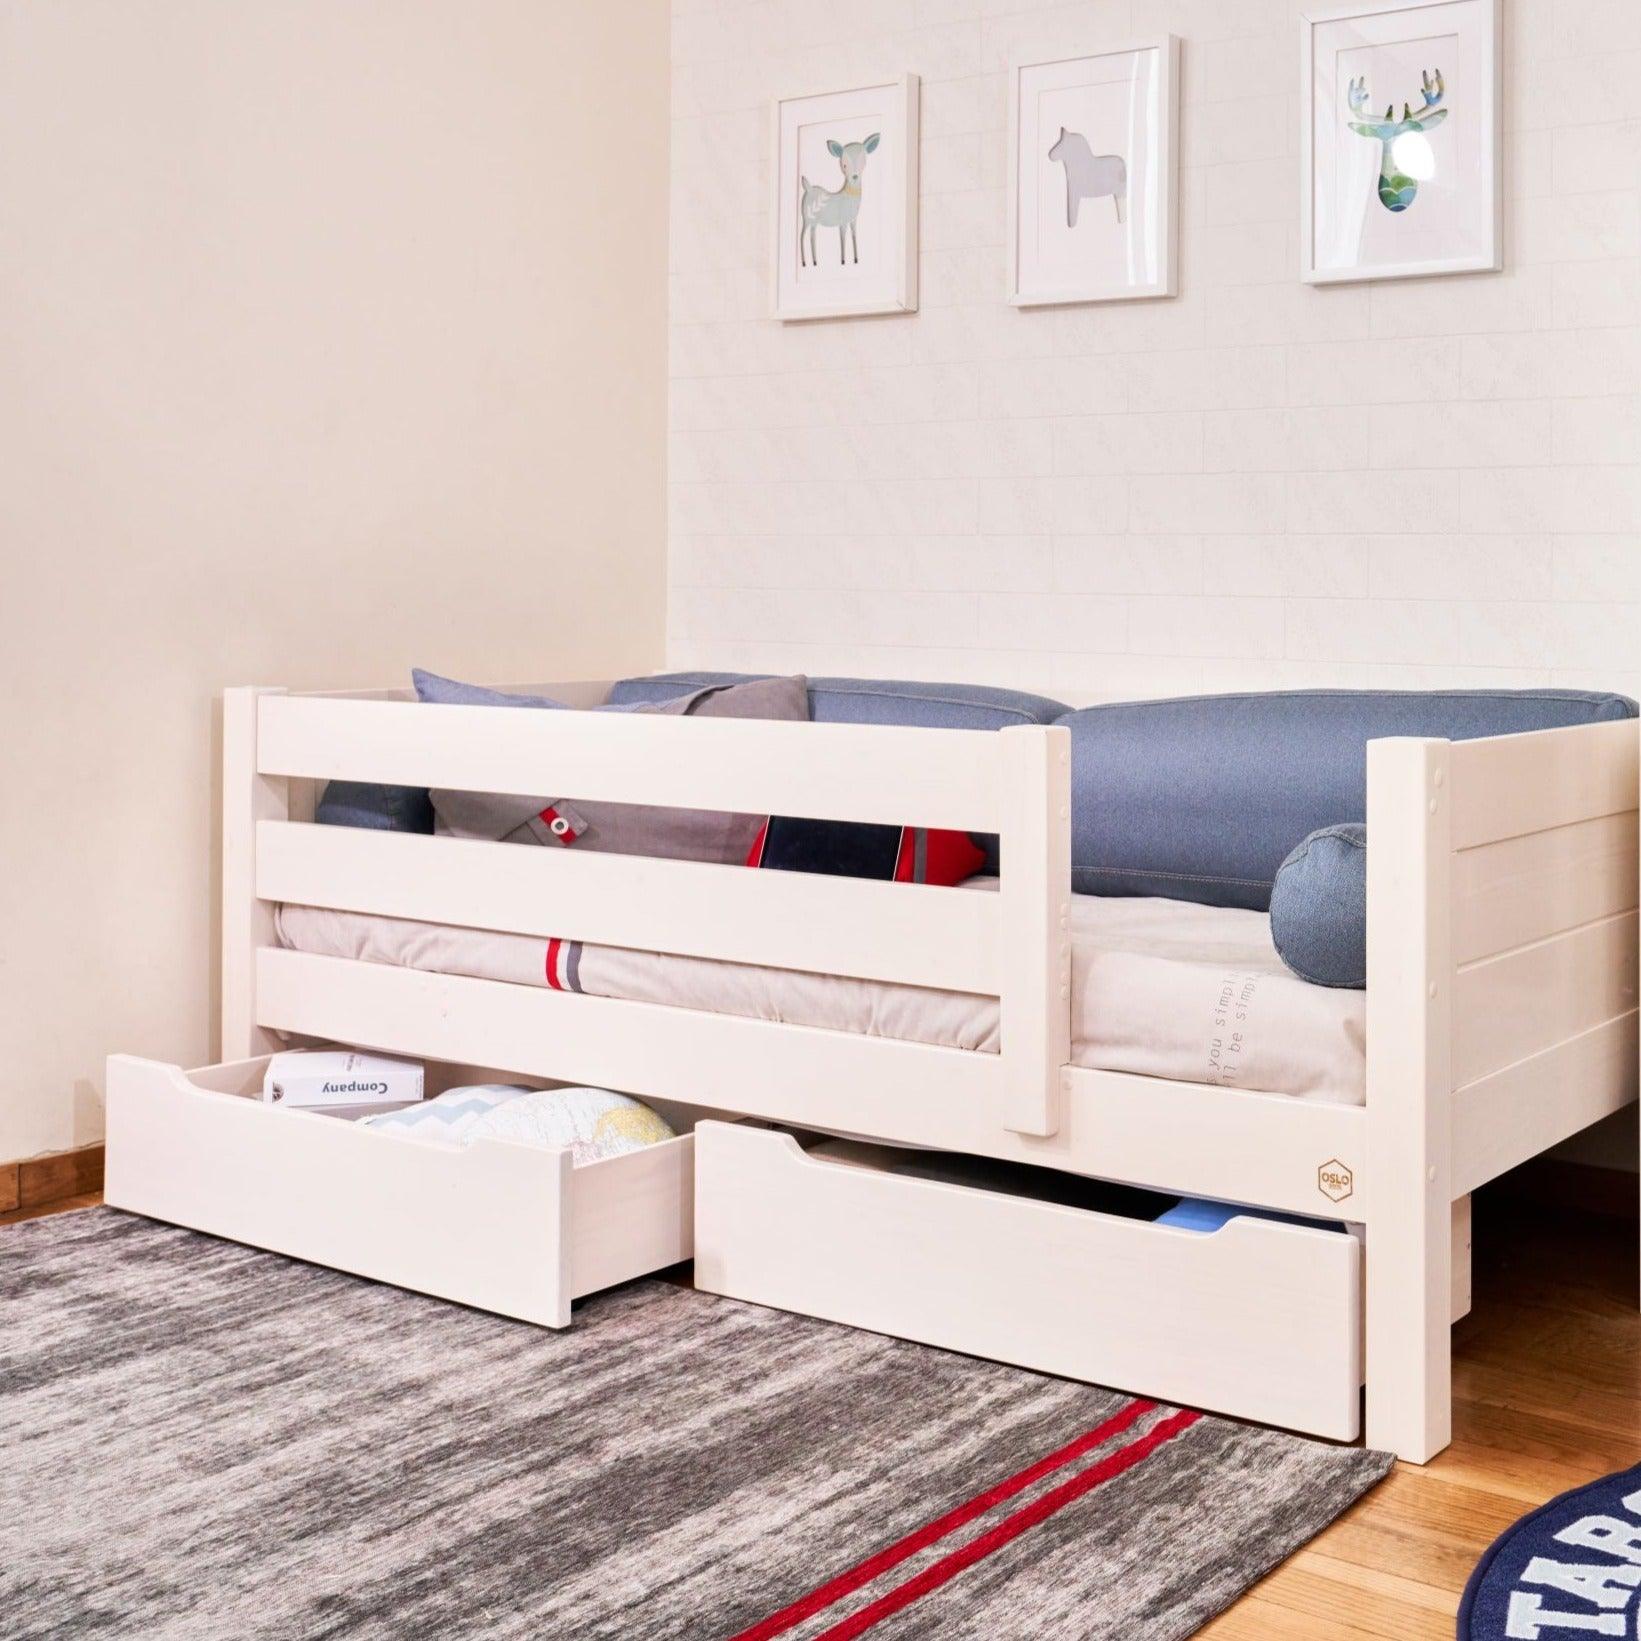 Modbed Drawer (1 piece) Only - Kids Haven